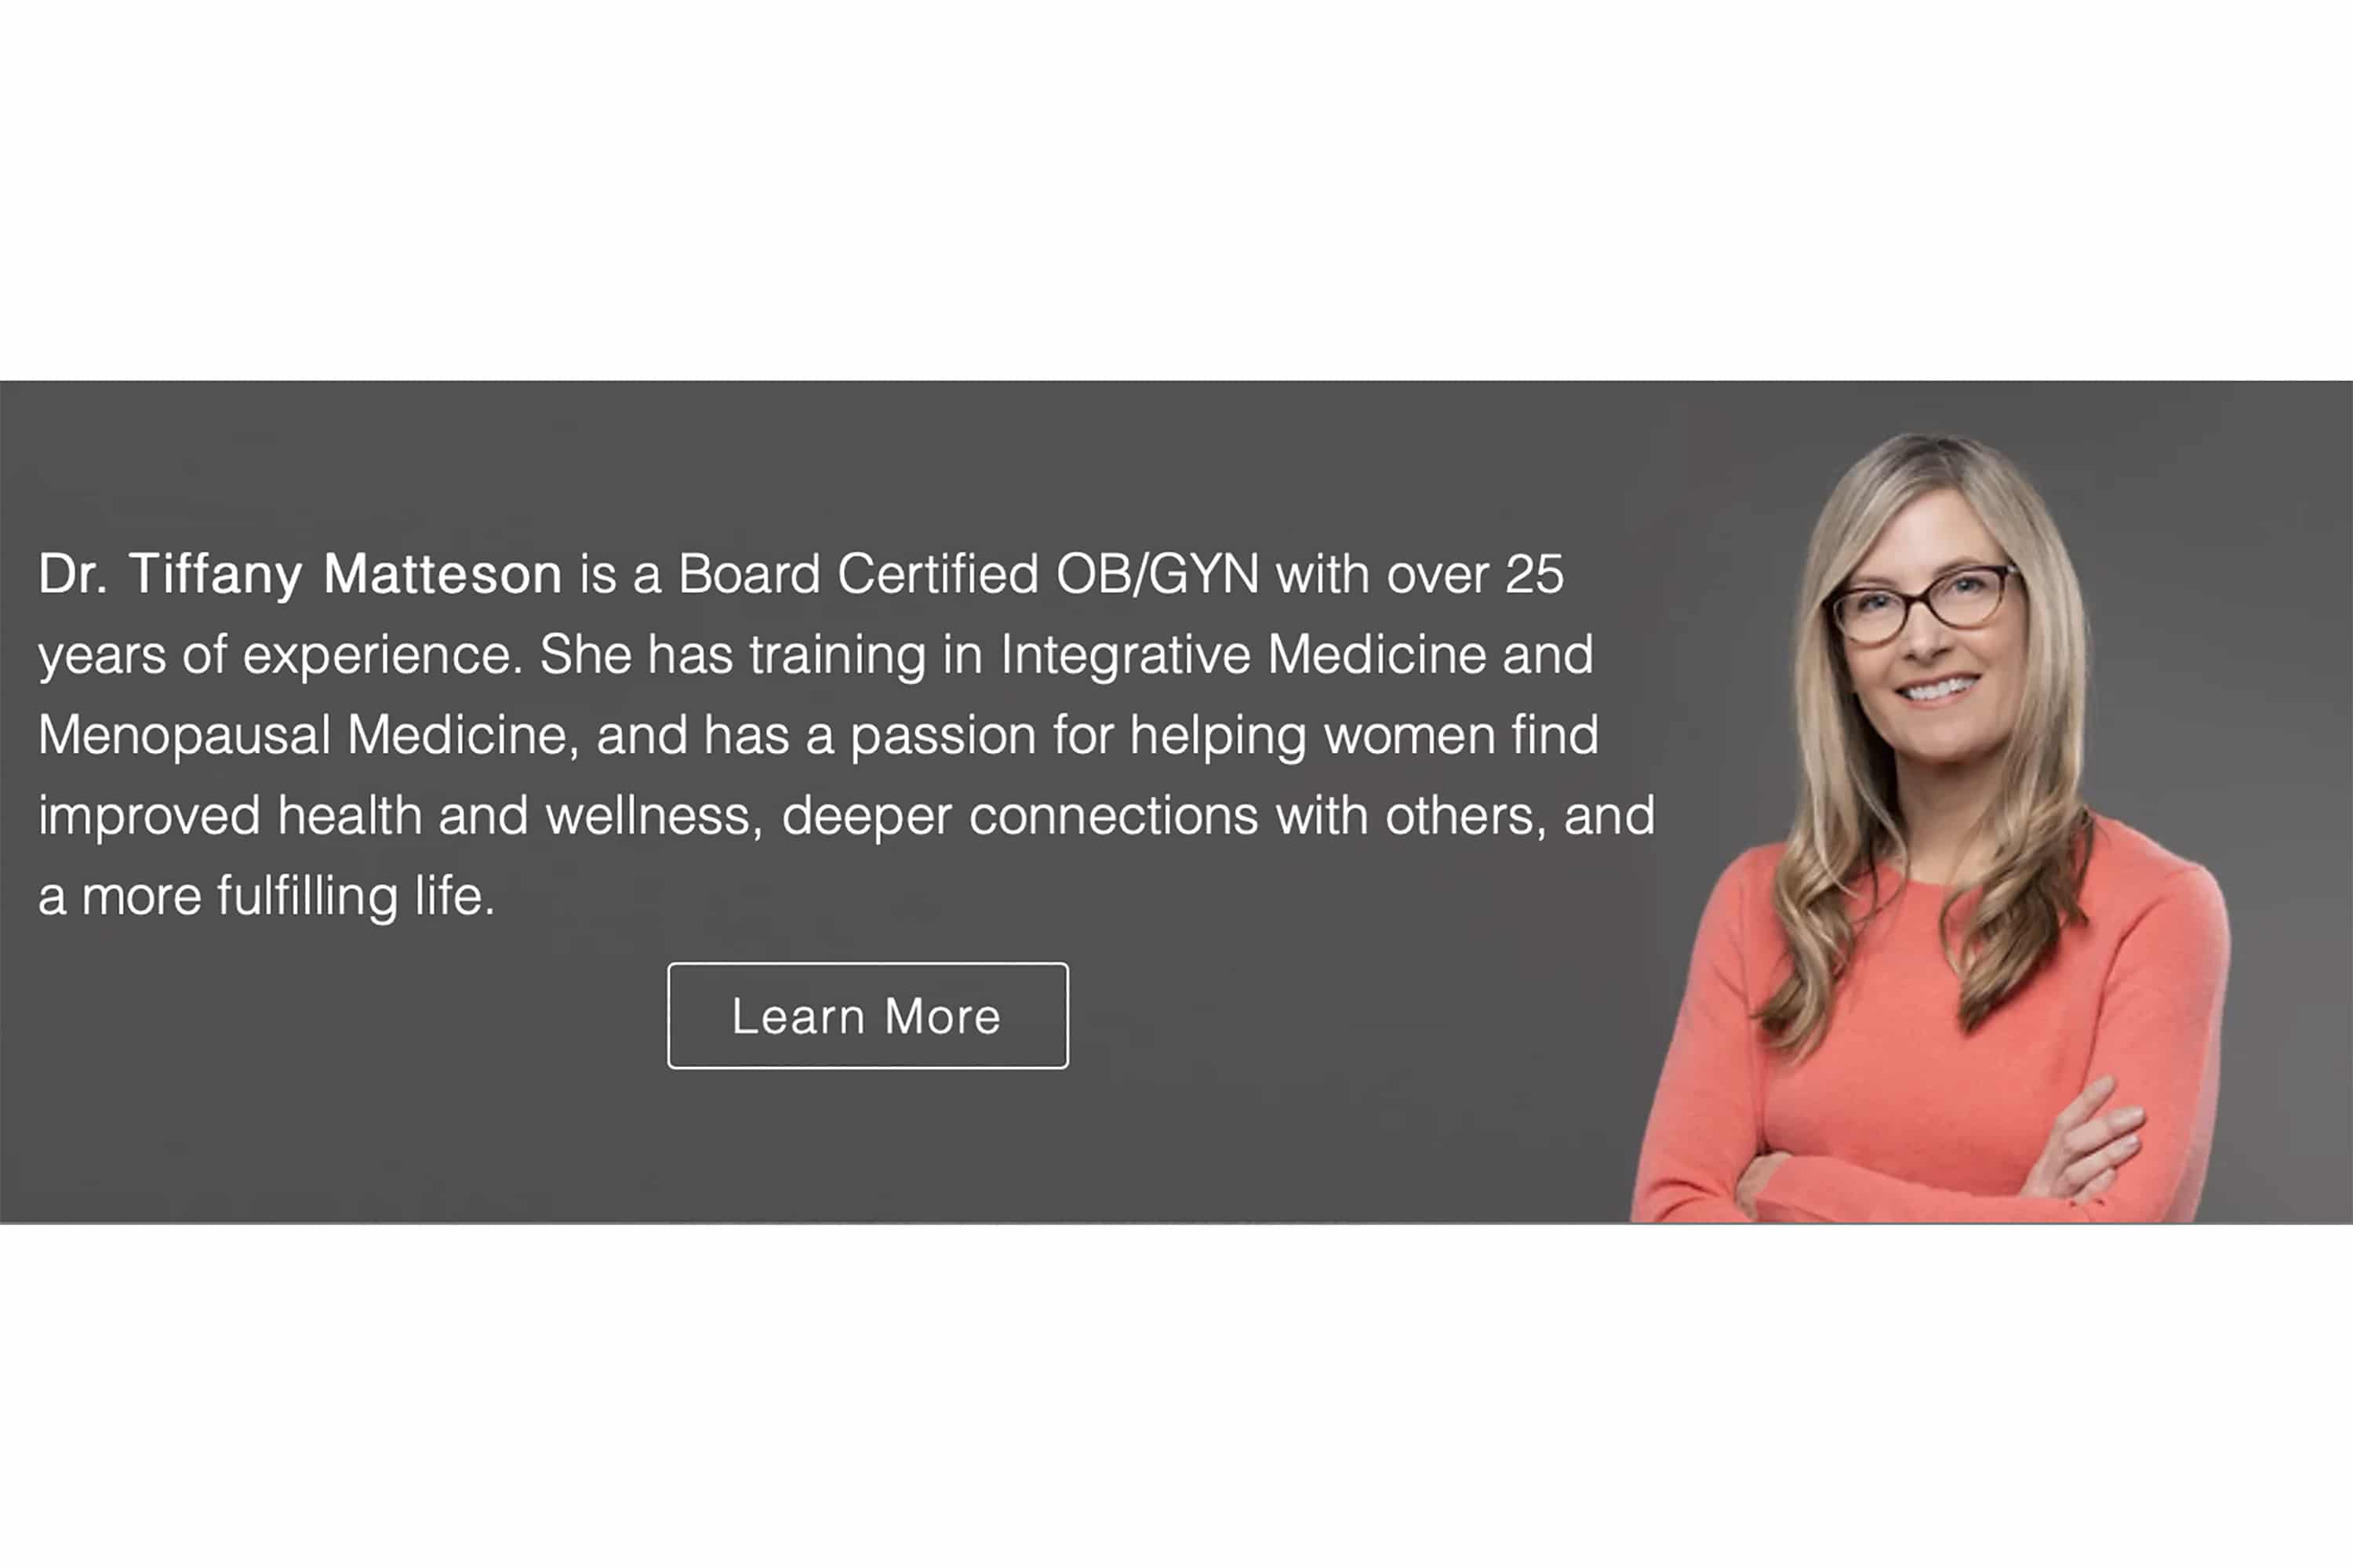 Headshot of a doctor smiling being used a banner on a professional website.